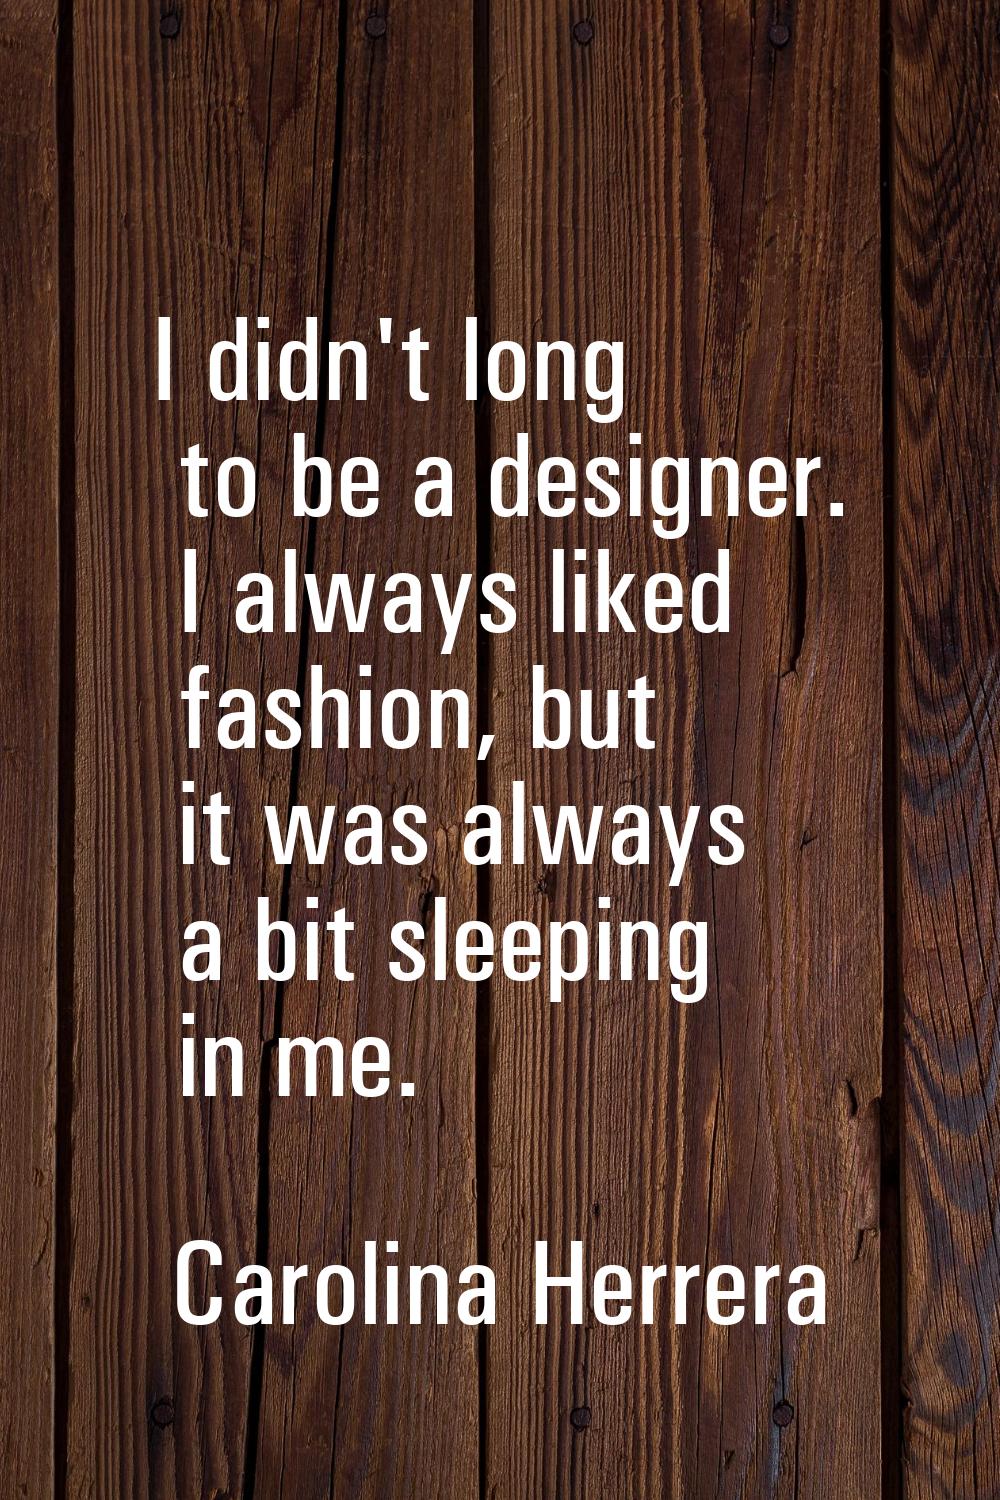 I didn't long to be a designer. I always liked fashion, but it was always a bit sleeping in me.